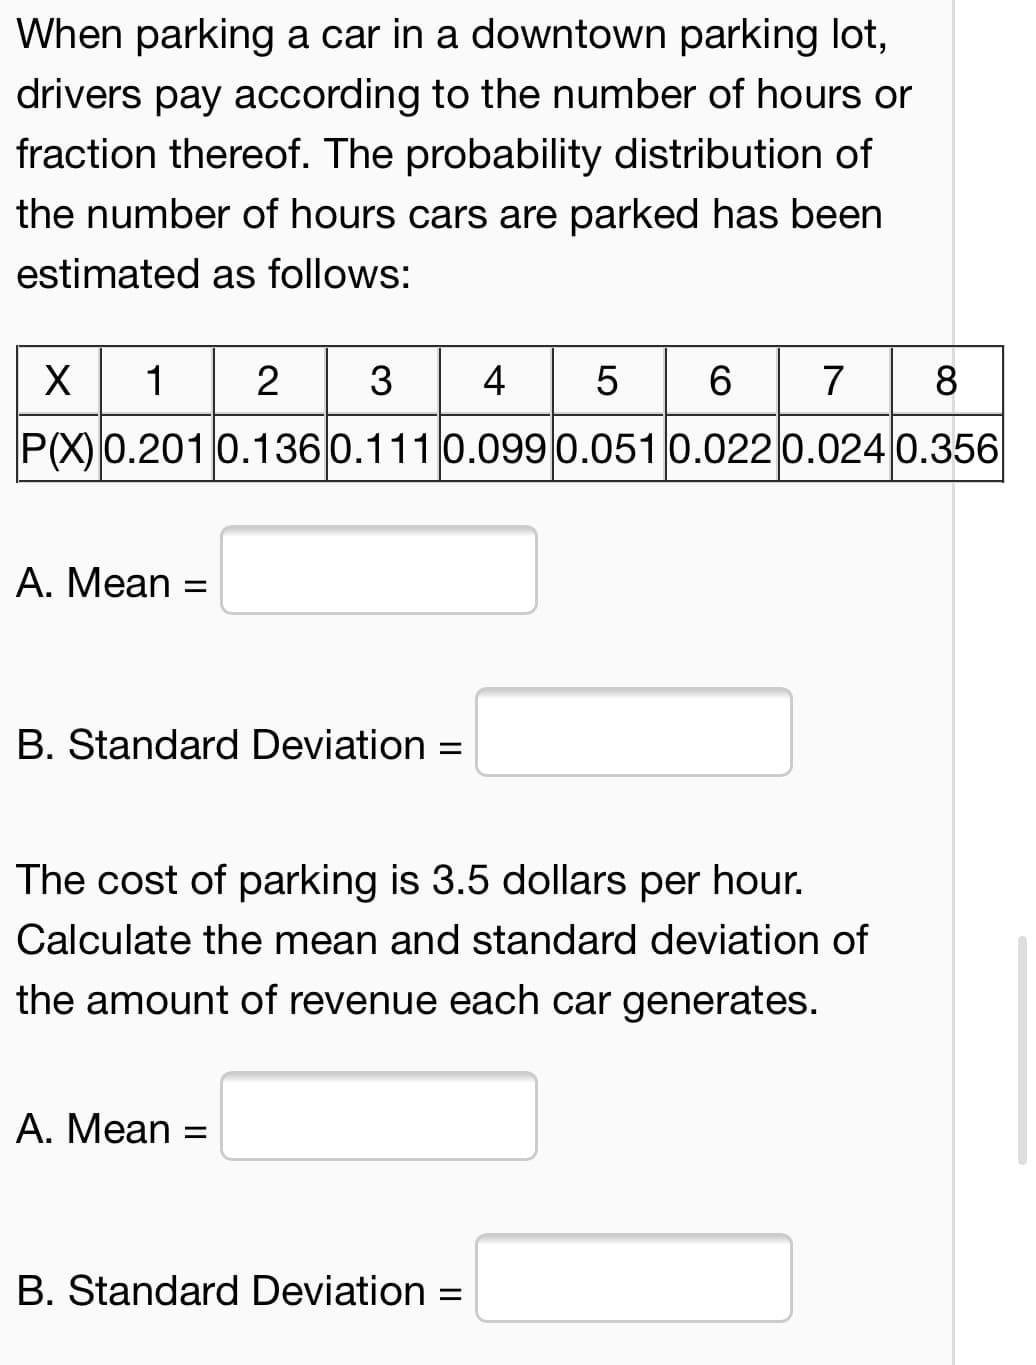 When parking a car in a downtown parking lot,
drivers pay according to the number of hours or
fraction thereof. The probability distribution of
the number of hours cars are parked has been
estimated as follows:
2 3
4 5 6
7 8
X
1
P(X)0.2010.136 0.111 0.099 0.051 0.022 0.024 0.356
A. Mean =
B. Standard Deviation =
The cost of parking is 3.5 dollars per hour.
Calculate the mean and standard deviation of
the amount of revenue each car generates.
A. Mean =
B. Standard Deviation =
